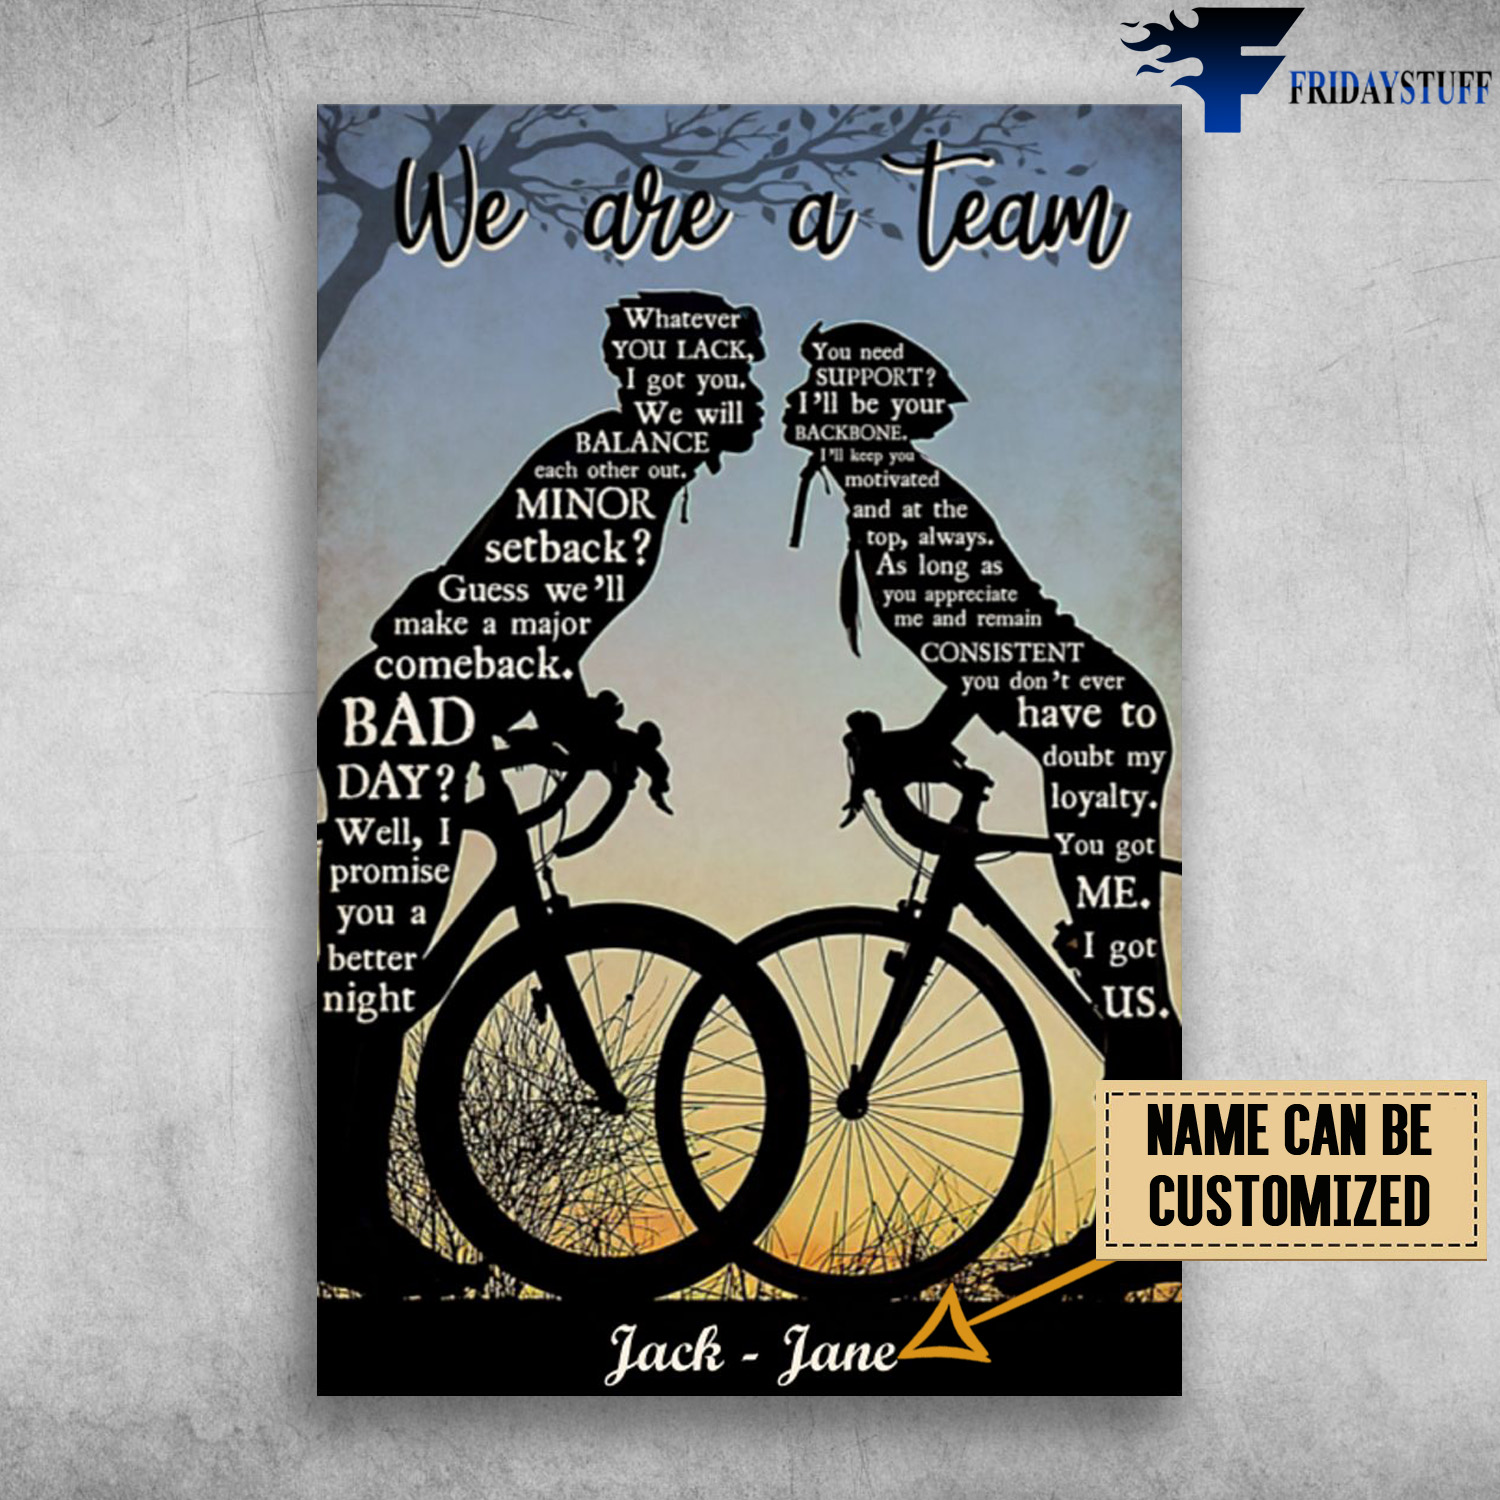 The Couple Cycling - We Are A Team, Whatever You Lack, I Got You, We Will Balance Each Other Out, Minor Setback, Guess We'll Make A Major Comeback, Bad Day, Well, I Promise You A Better Nighr, You Need Suppoer, I'll Be Your Backbone